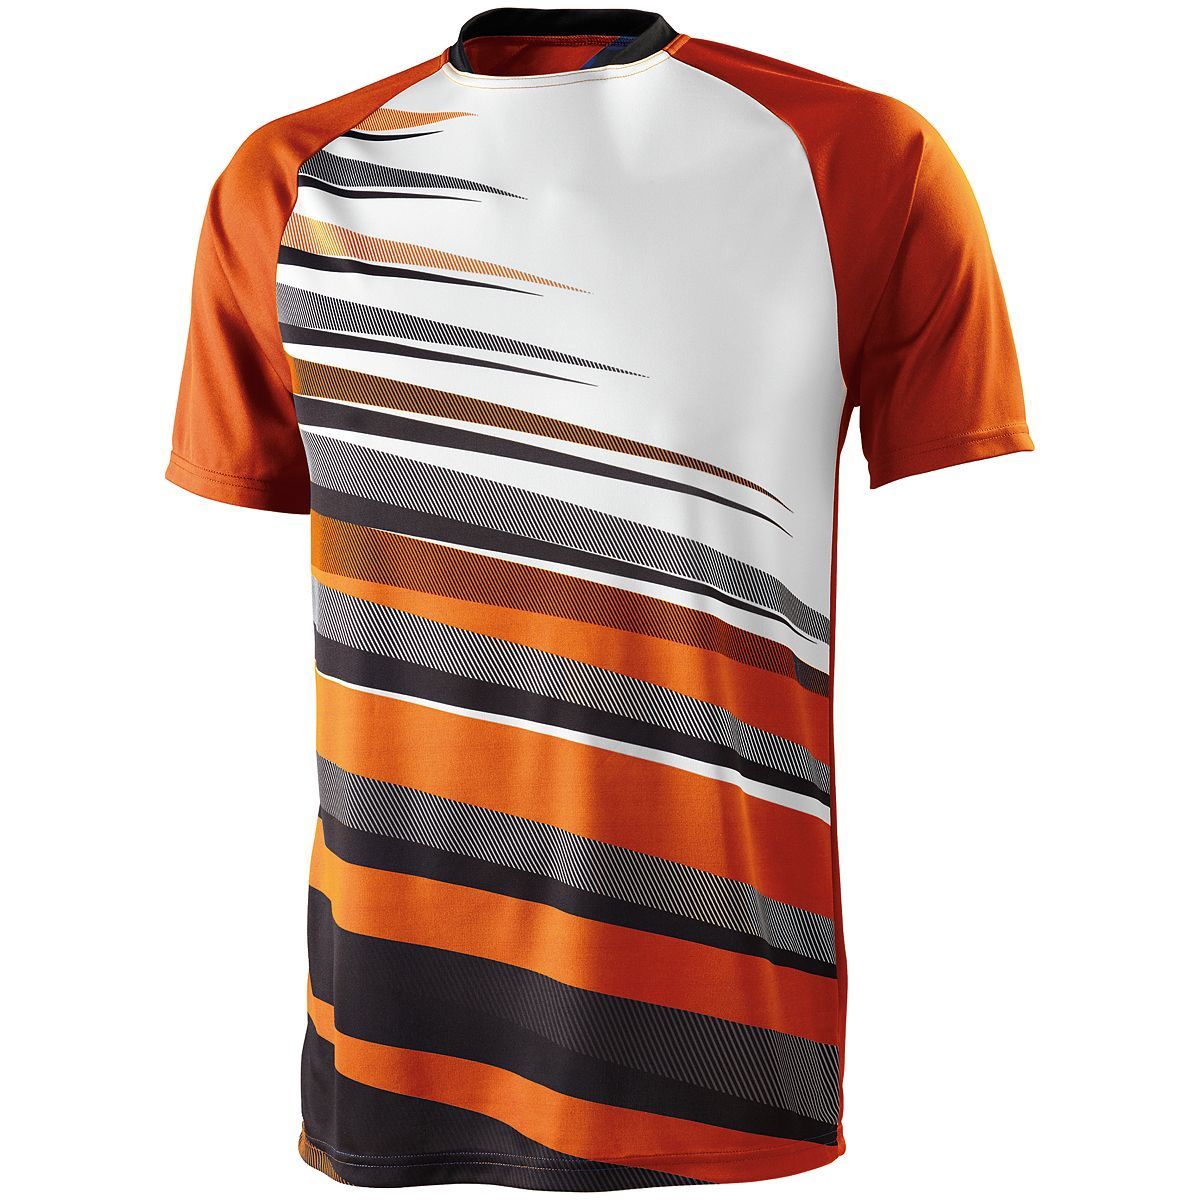 High 5 Youth Galactic Jersey in Orange/Black/White  -Part of the Youth, Youth-Jersey, High5-Products, Soccer, Shirts, All-Sports-1 product lines at KanaleyCreations.com